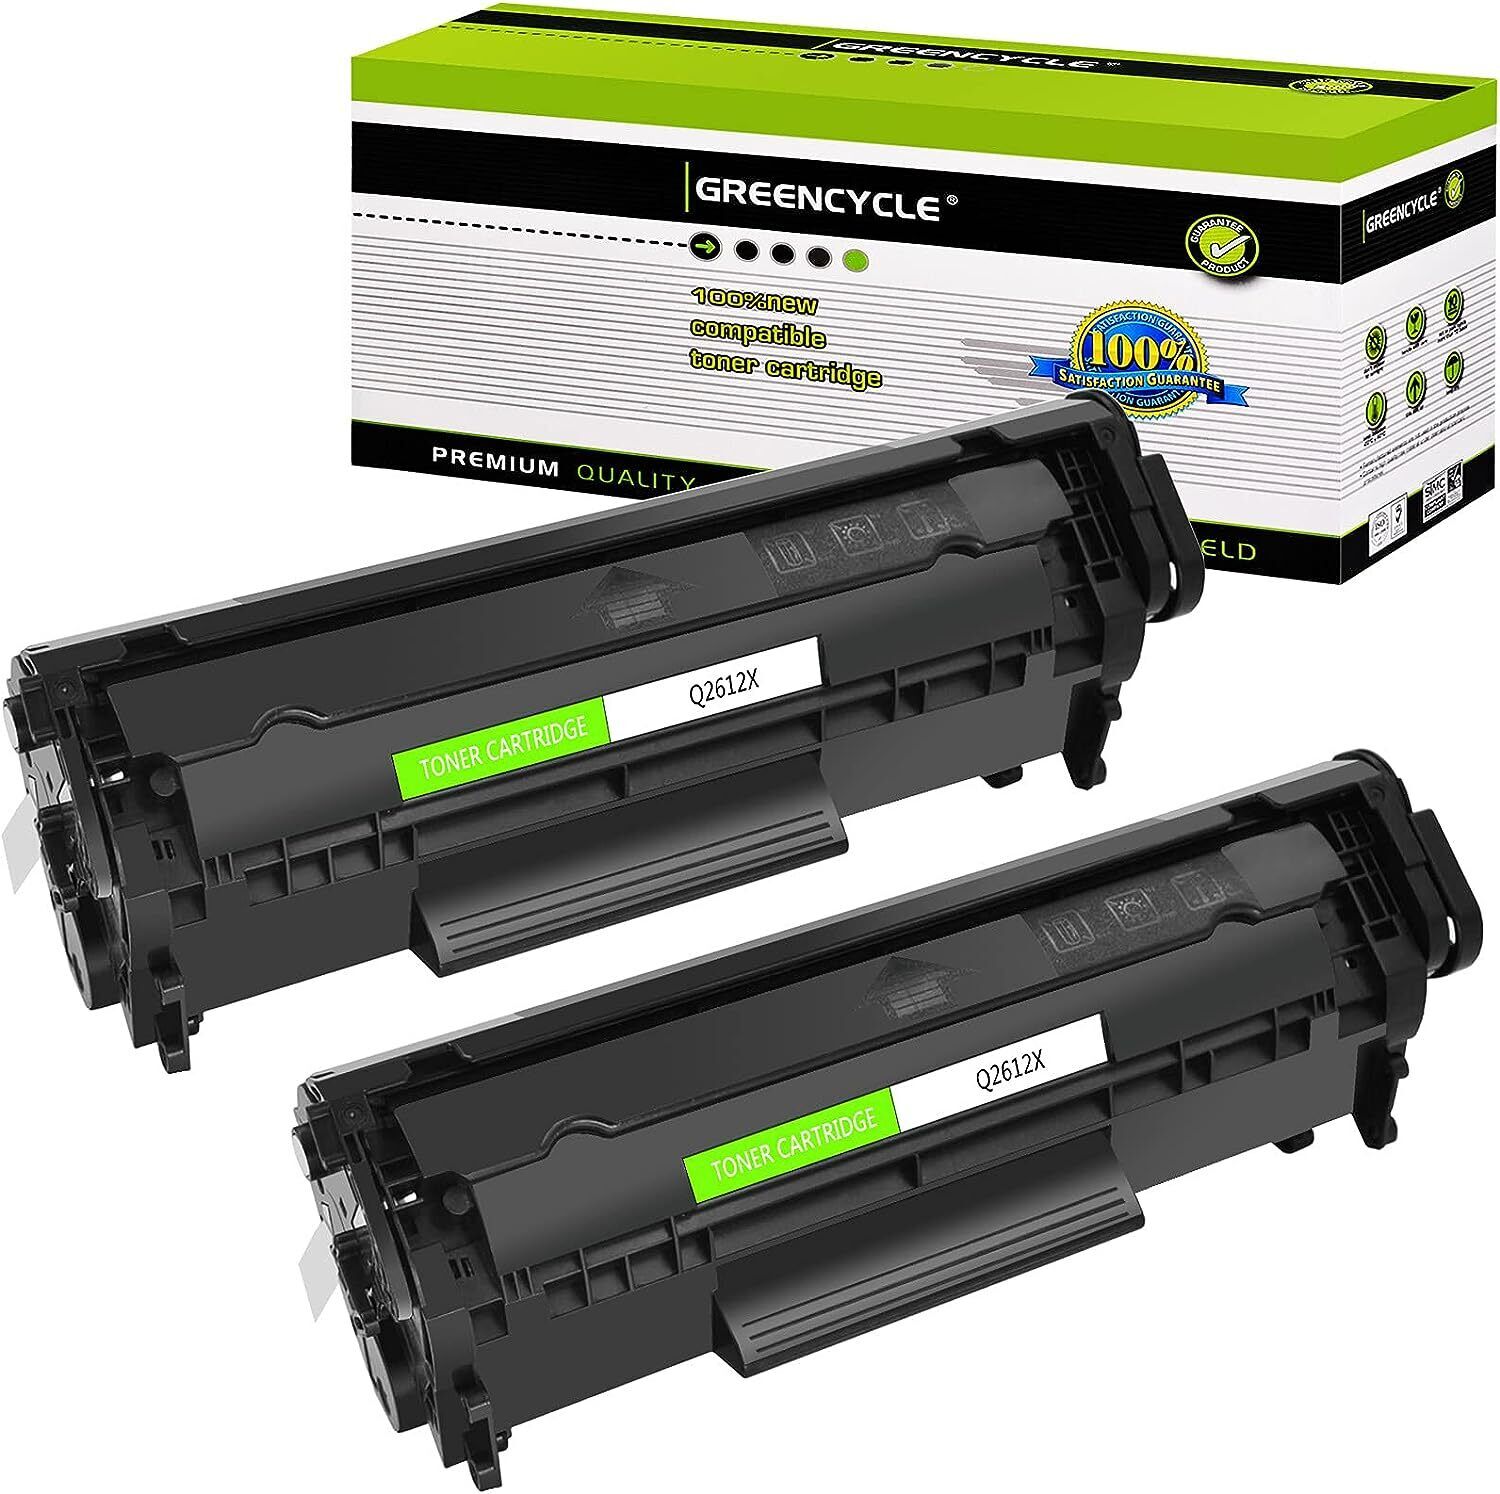 2PK greencycle High Yield Compatible Toner Cartridge for HP 12X Q2612X 1022 1020